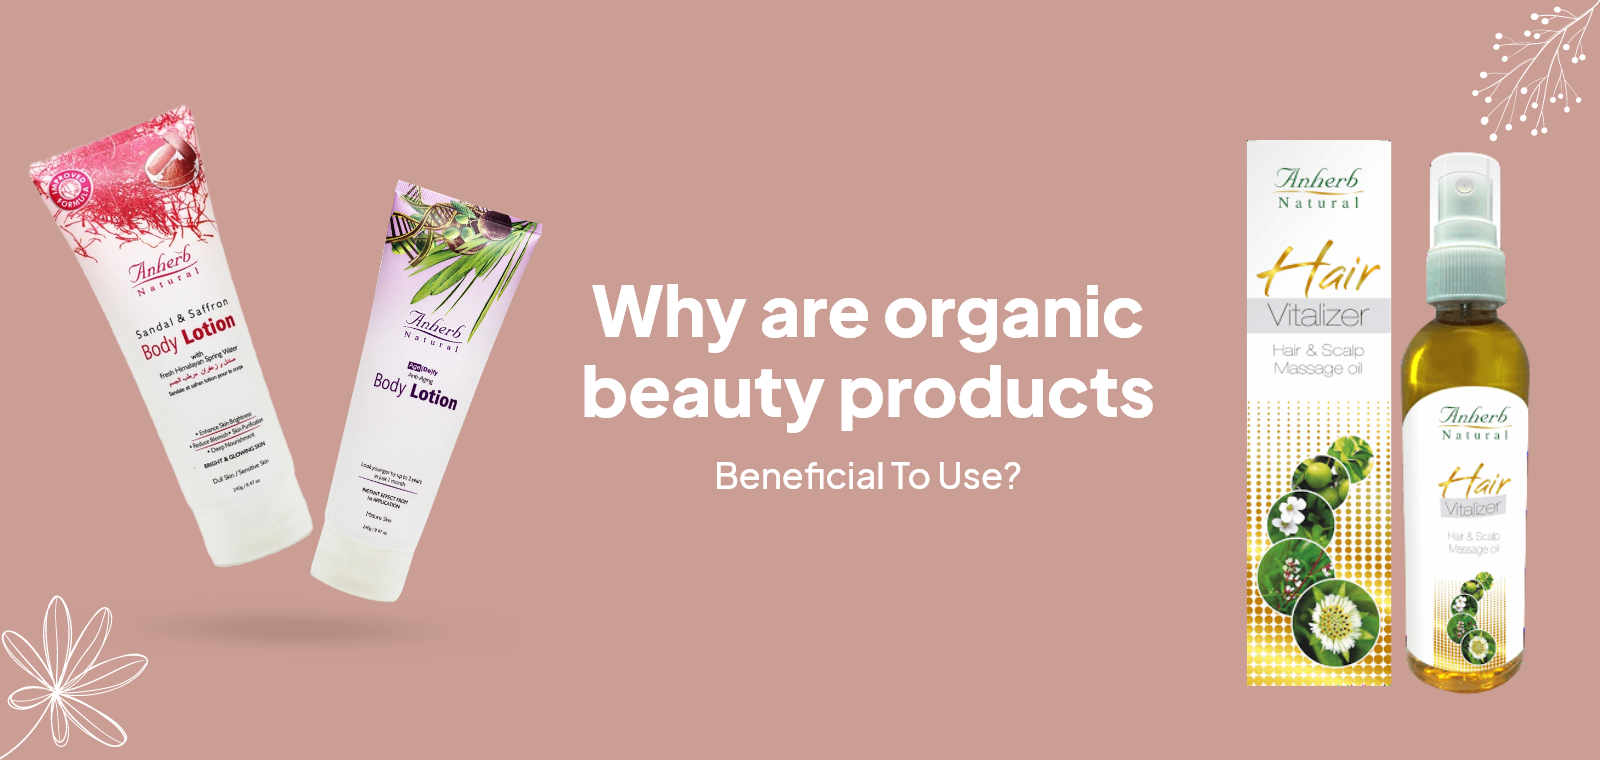 Why are organic beauty products Beneficial To Use?